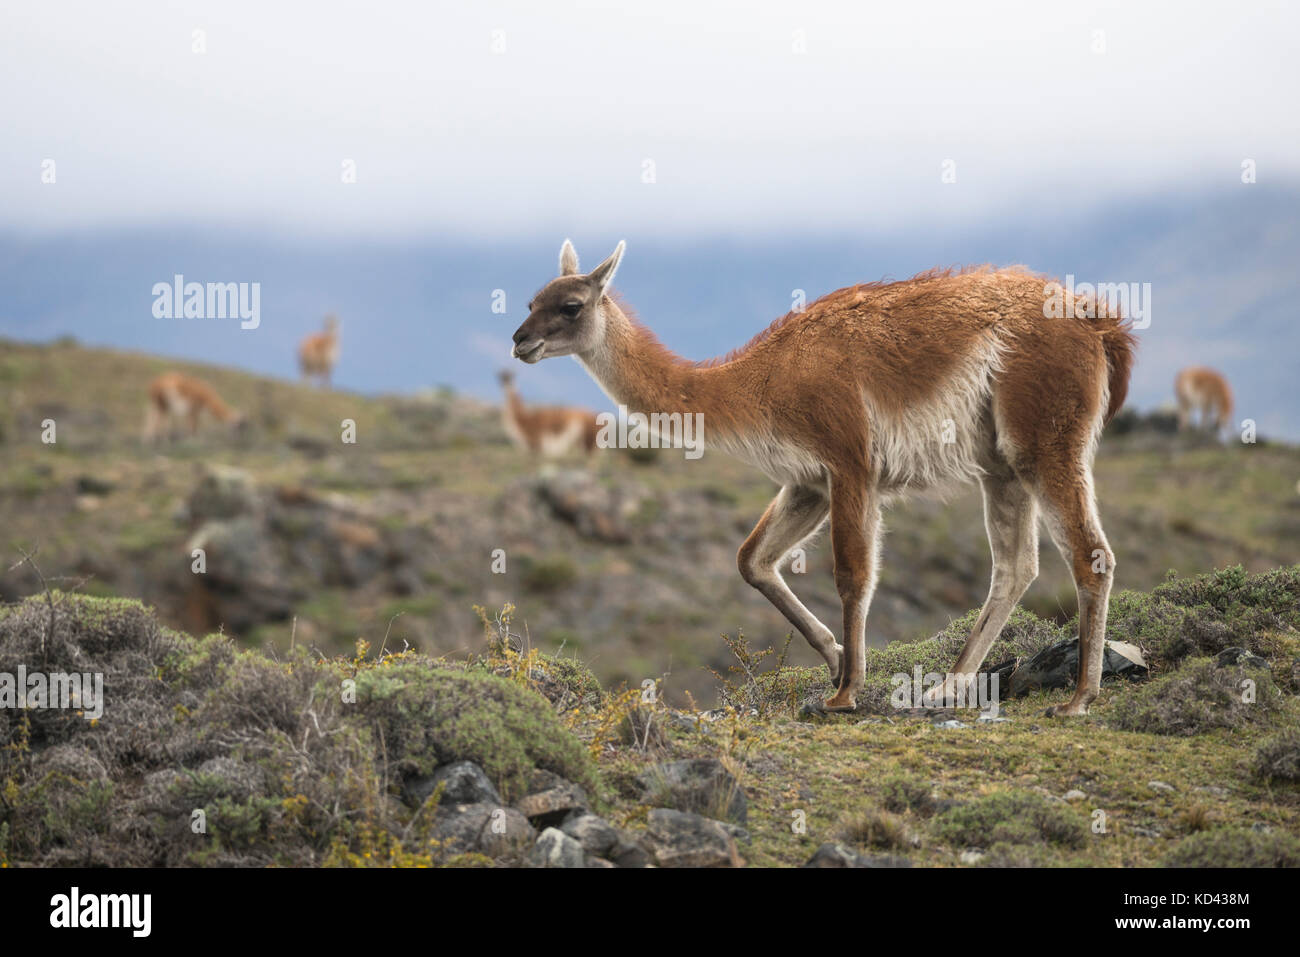 A Guanaco from Torres del Paine National Park, Chile Stock Photo